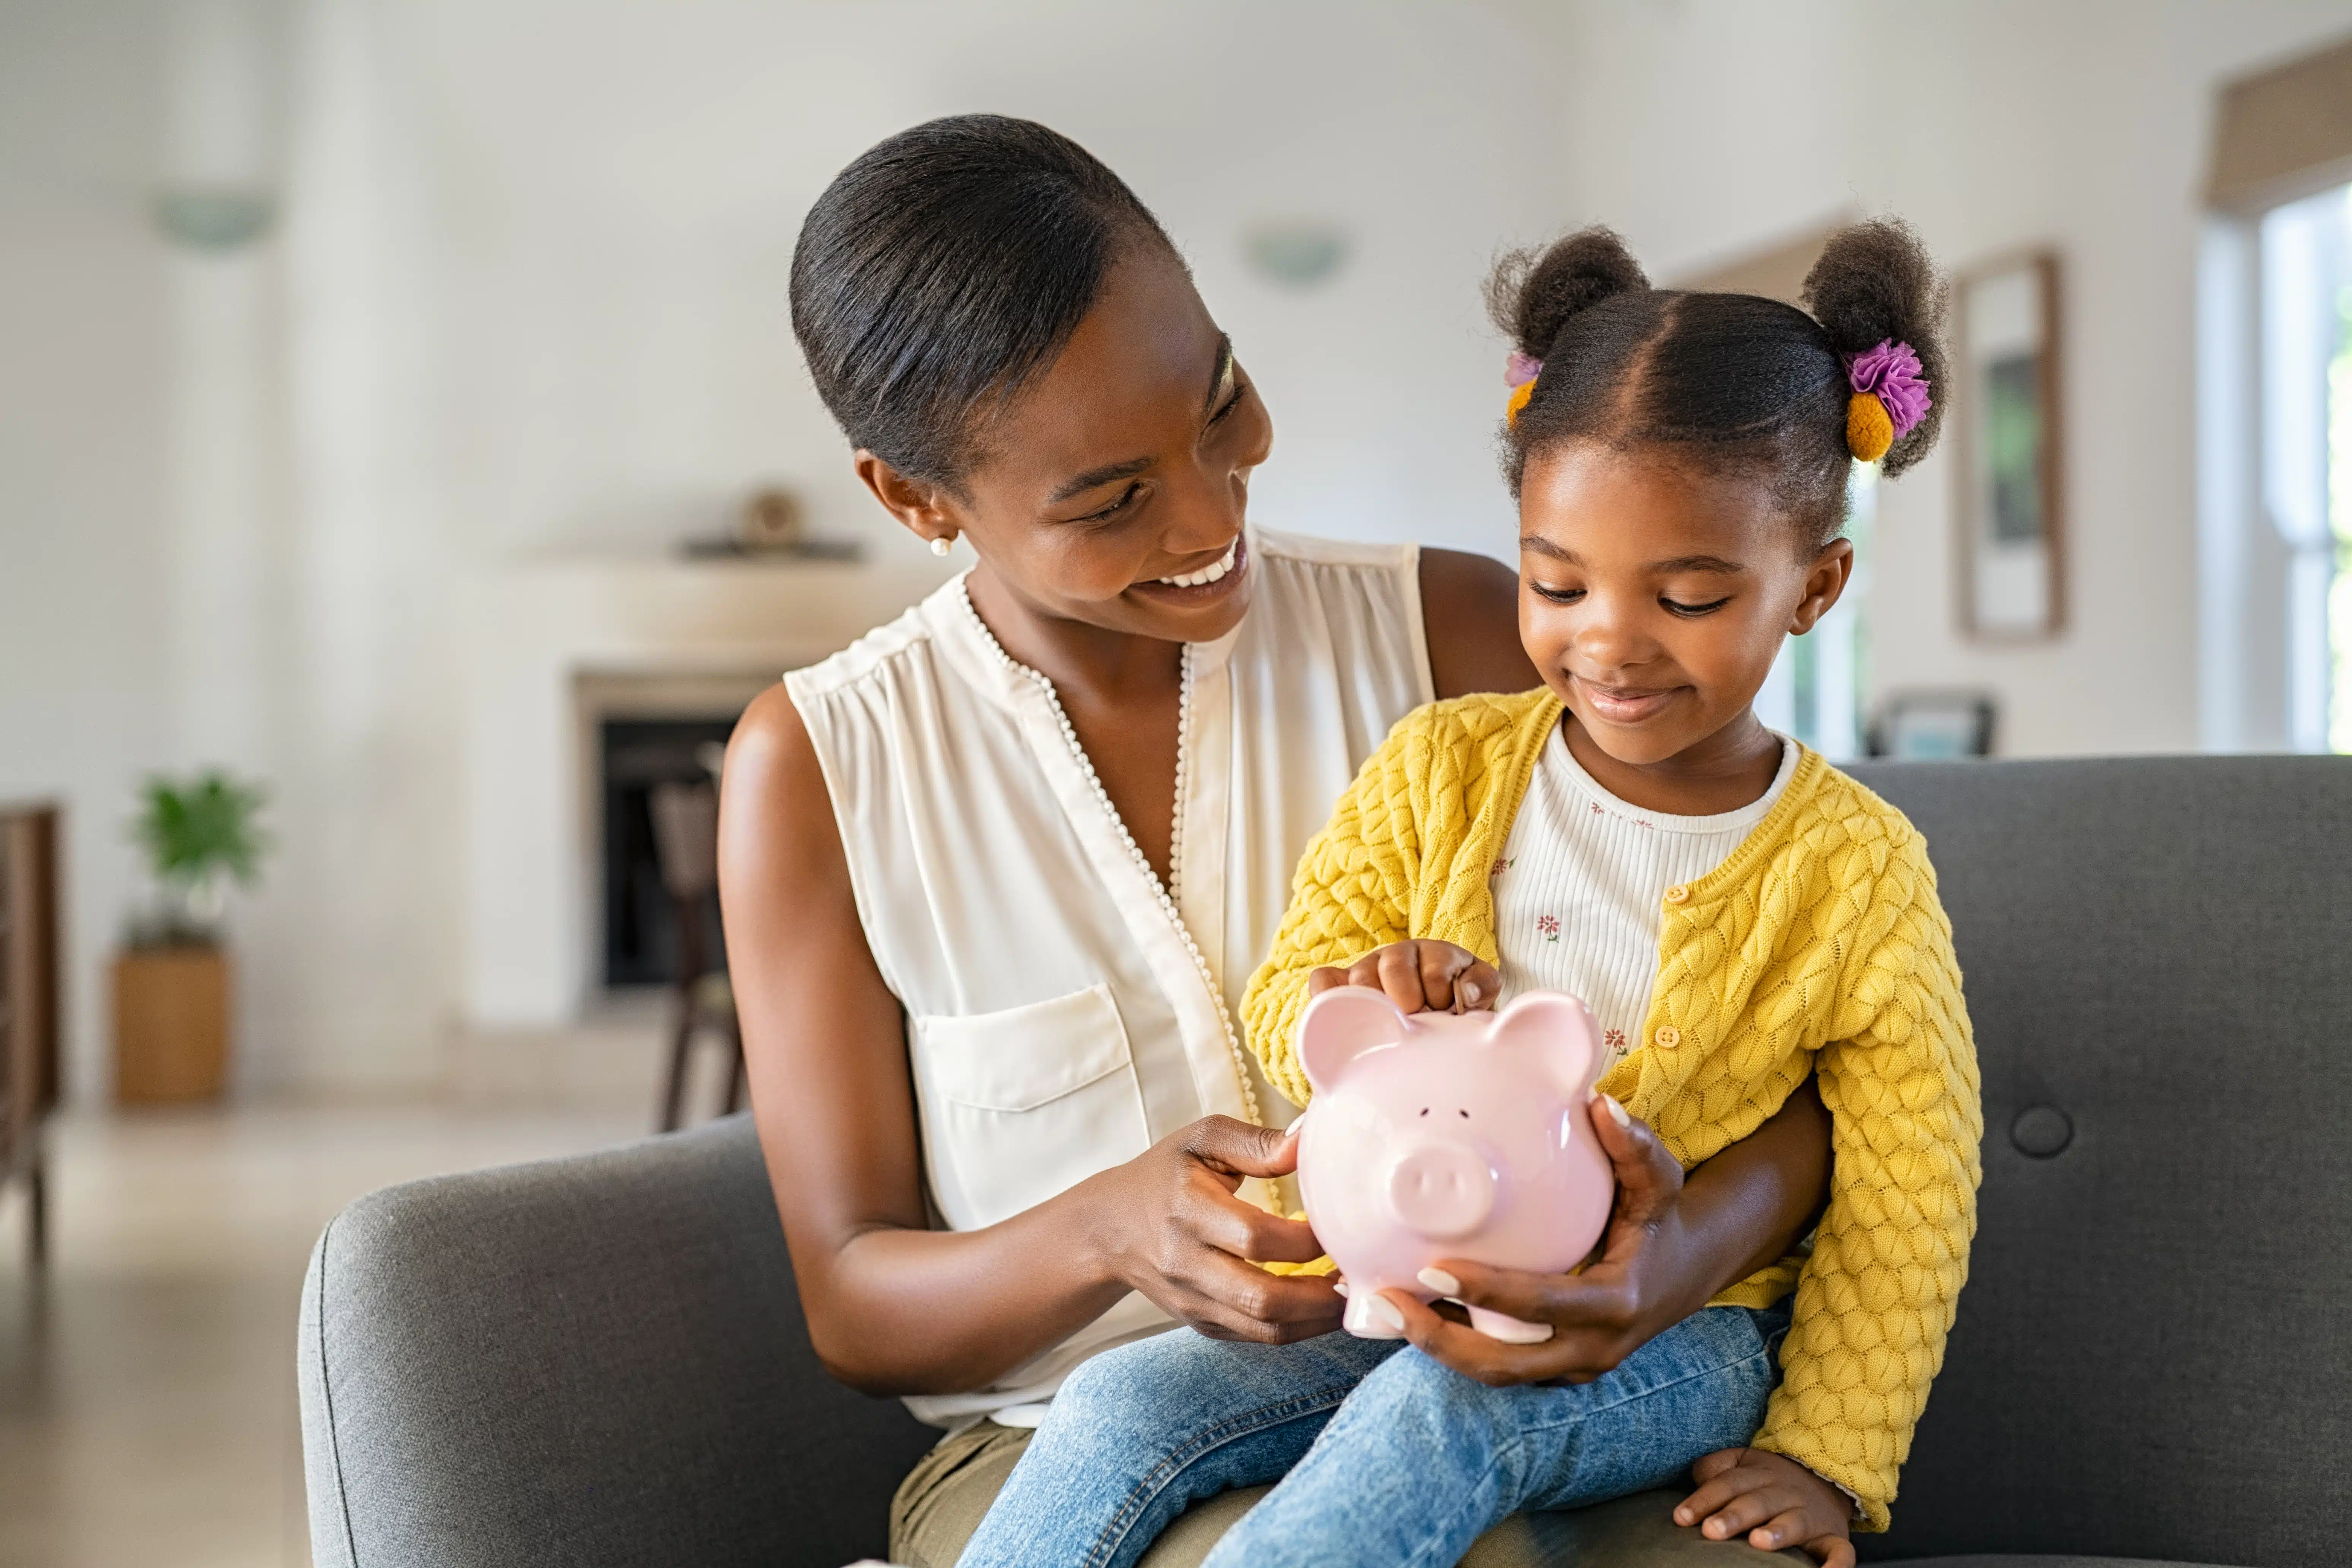 How should I teach my children about money?